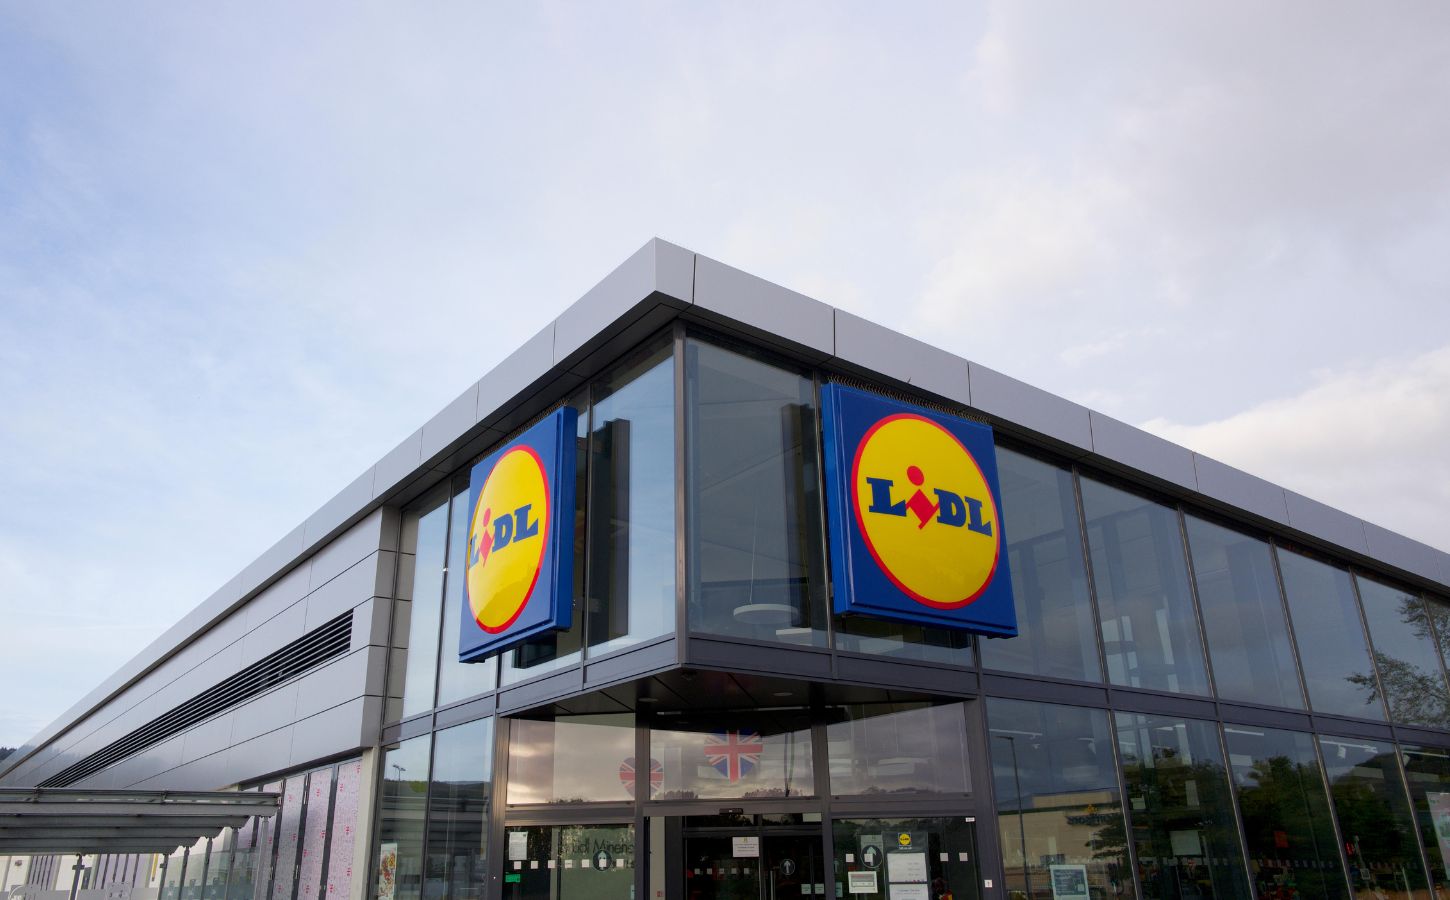 The outside of budget retailer Lidl, which recently lowered the price of its plant-based food products